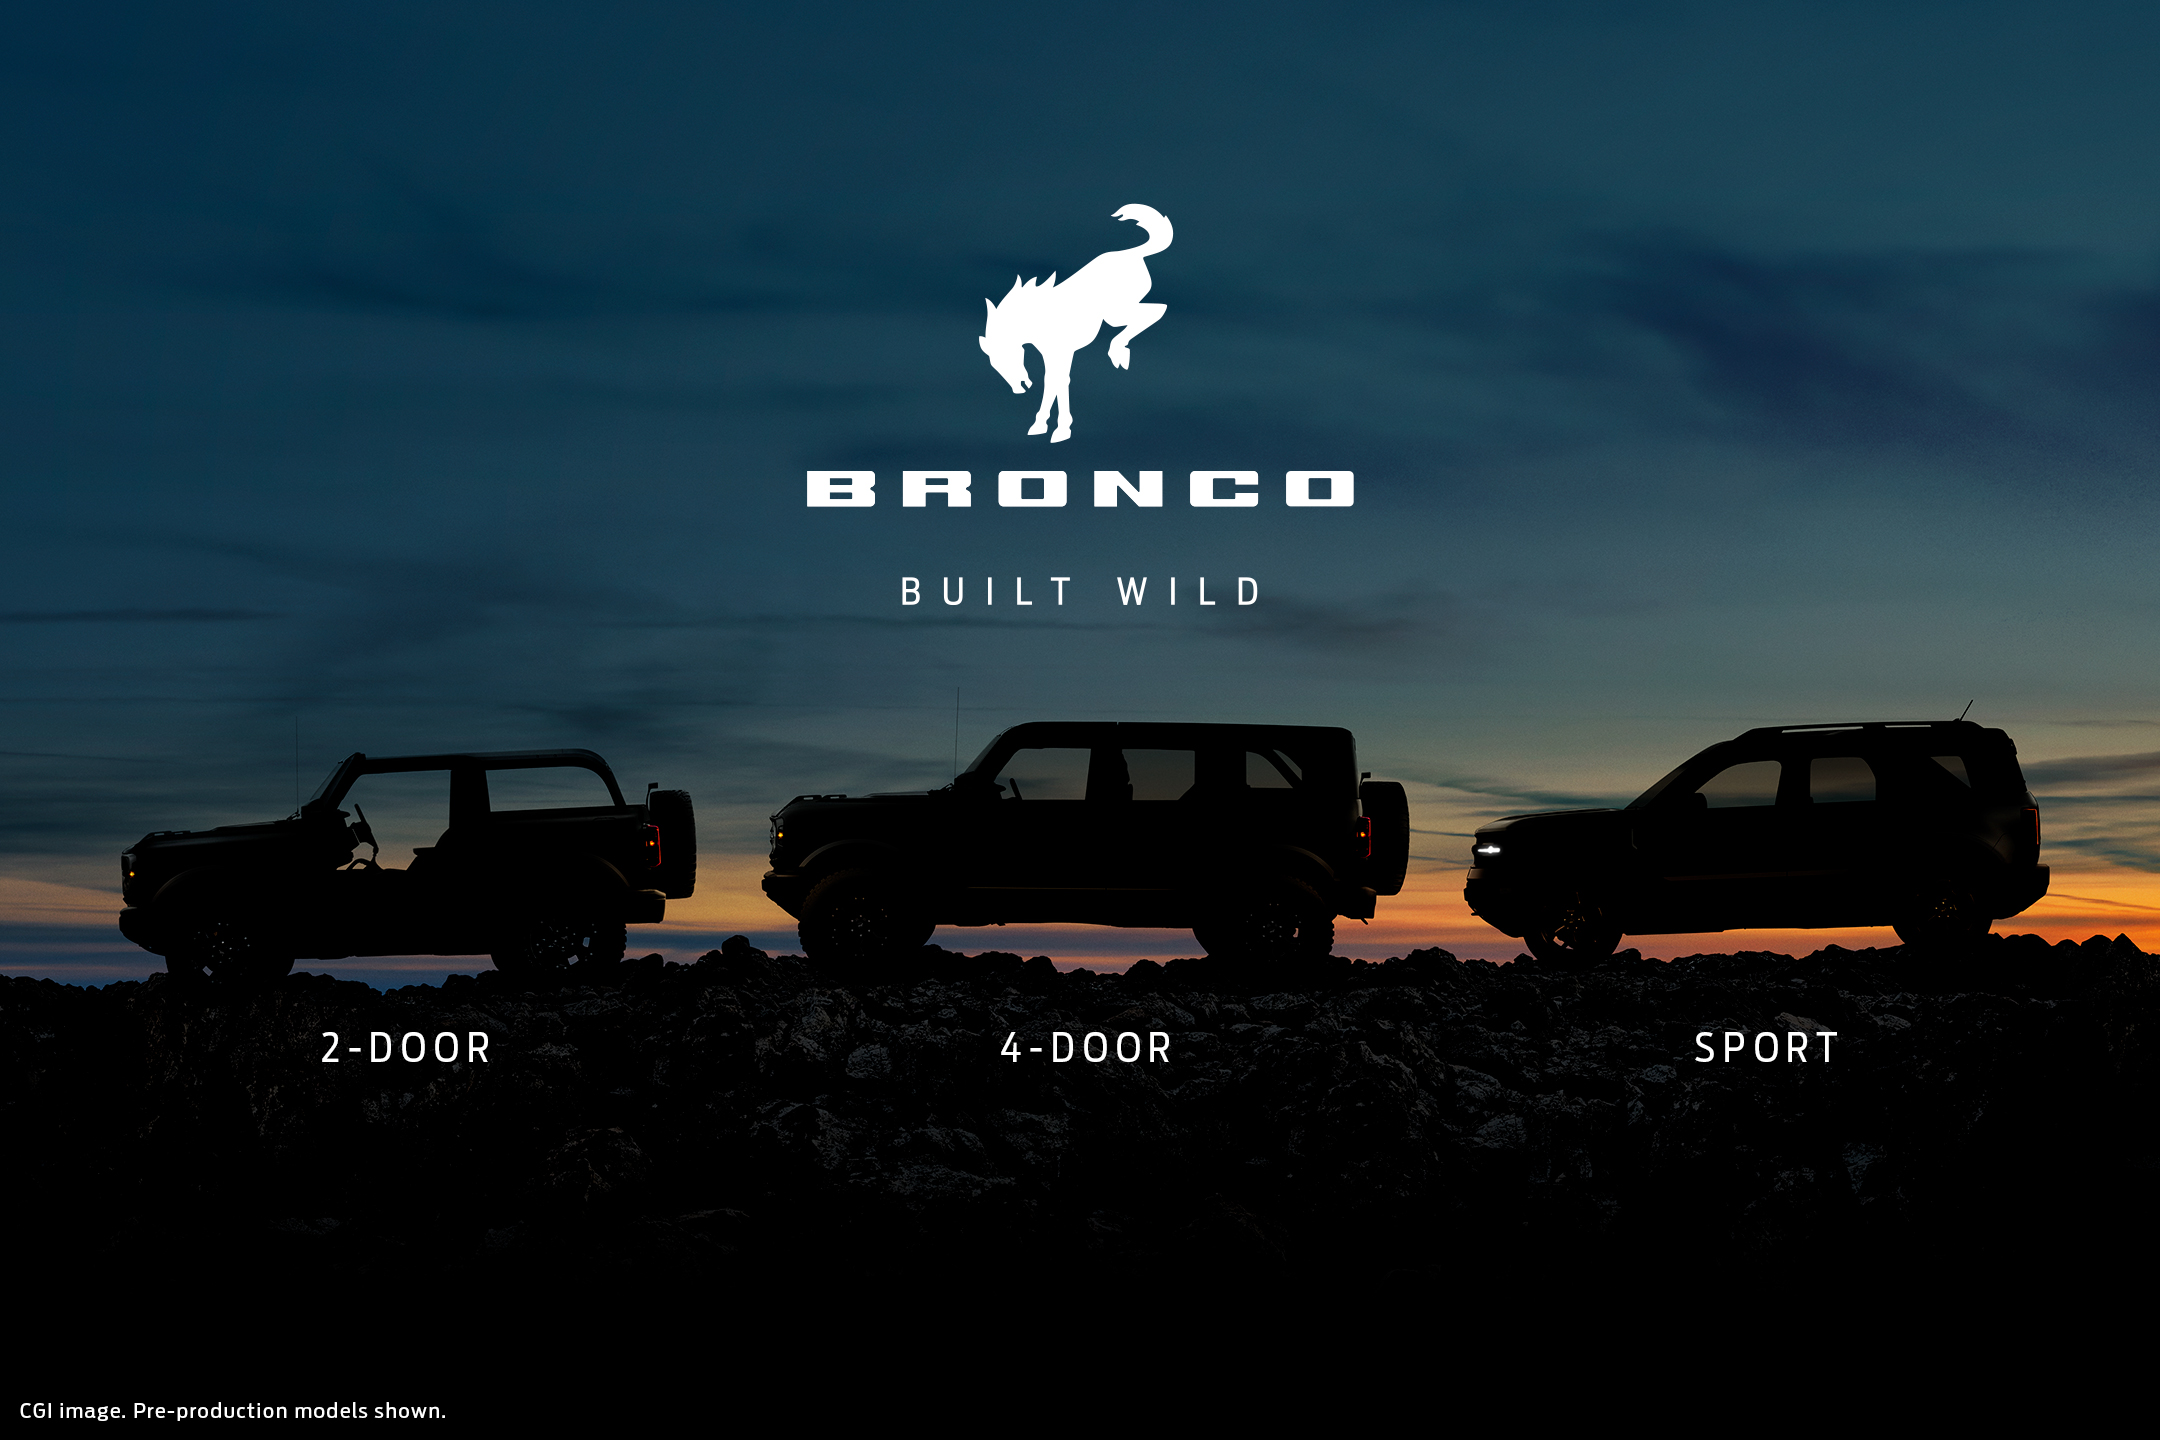 Bronco To Be Launched as Ford’s Outdoor Brand